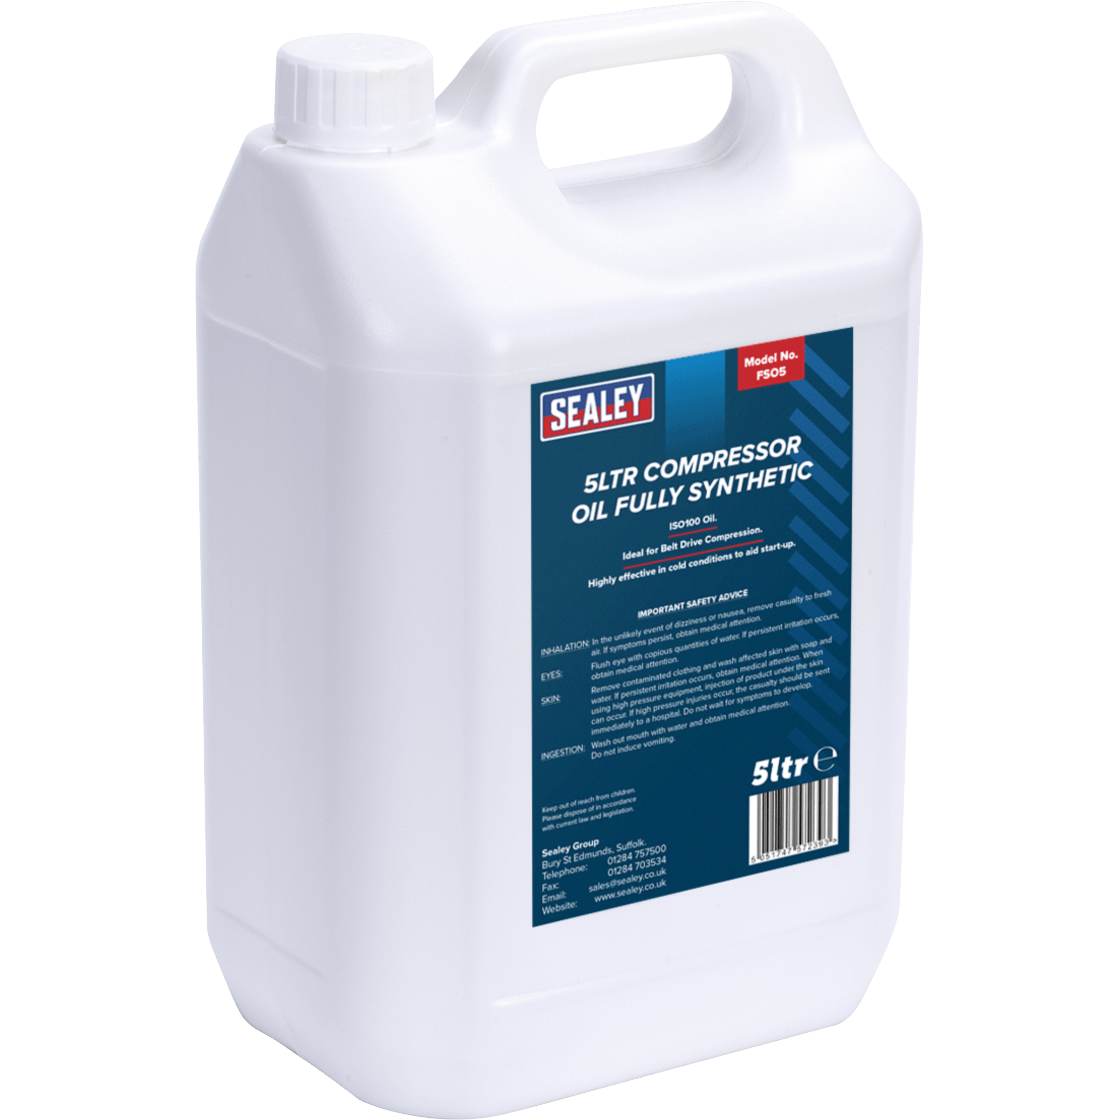 Sealey Fully Synthetic Compressor Oil 5l